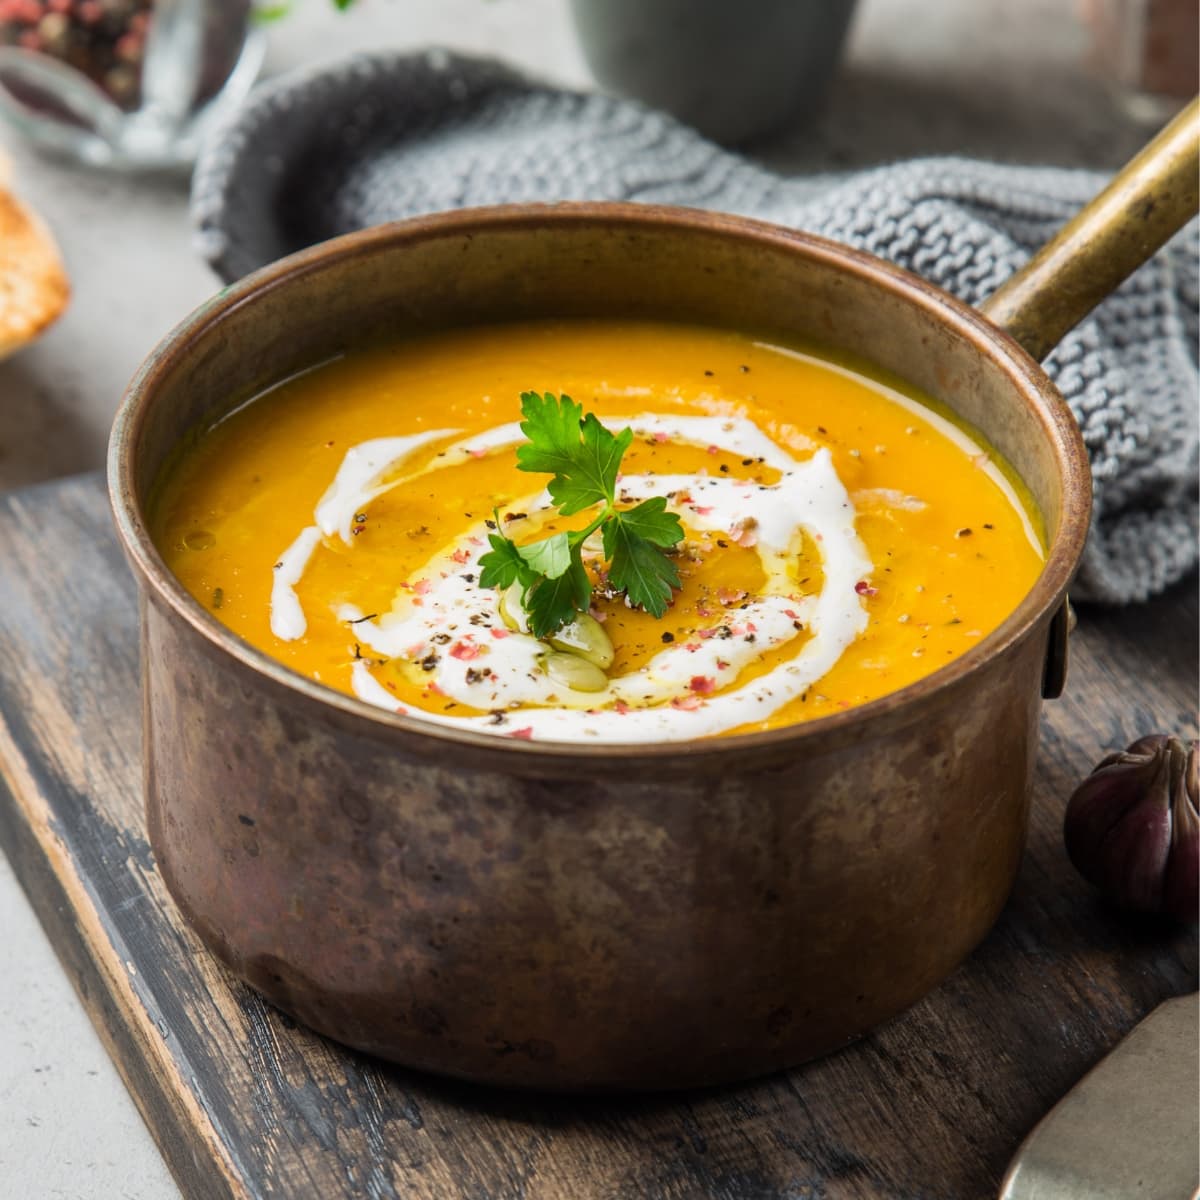 Pumpkin Soup Made From Pumpkin Puree with Seasonings, Oil, Cream, and Parsley on Top  in a Metal Pot on a Wooden Table